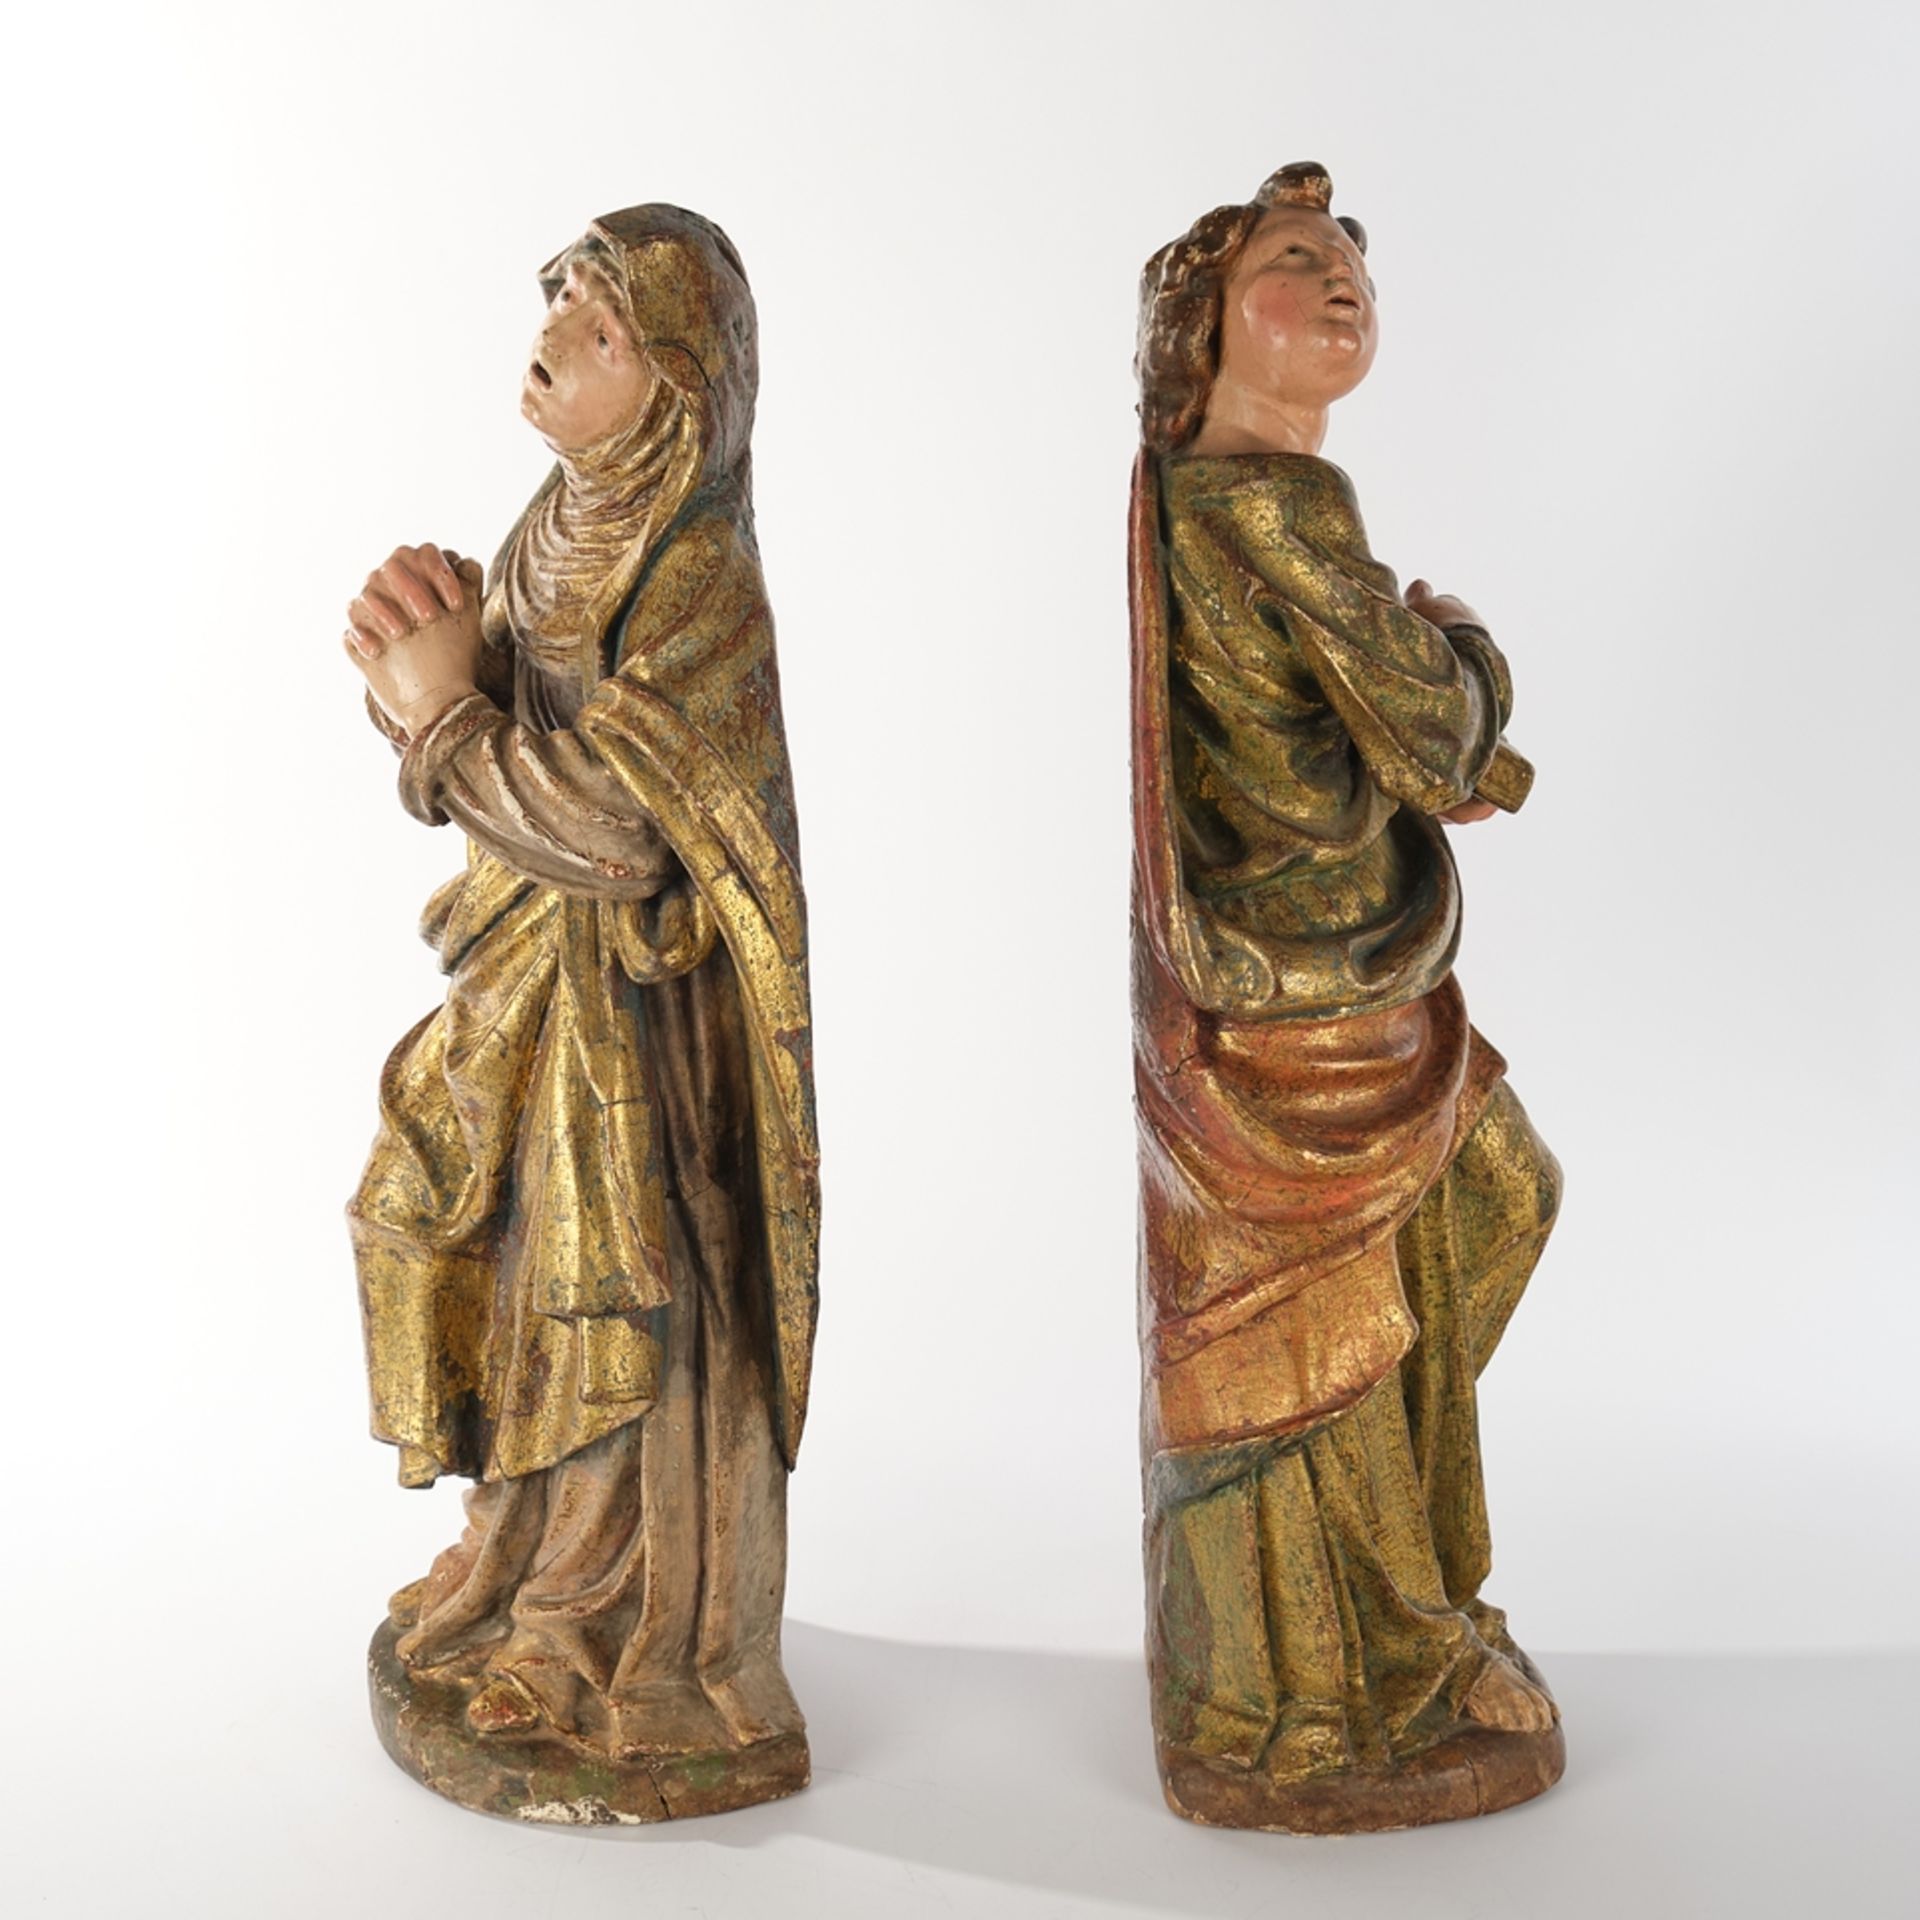 2 wooden figures(17th century),"Mary"and "John",(17th century), - Image 2 of 4